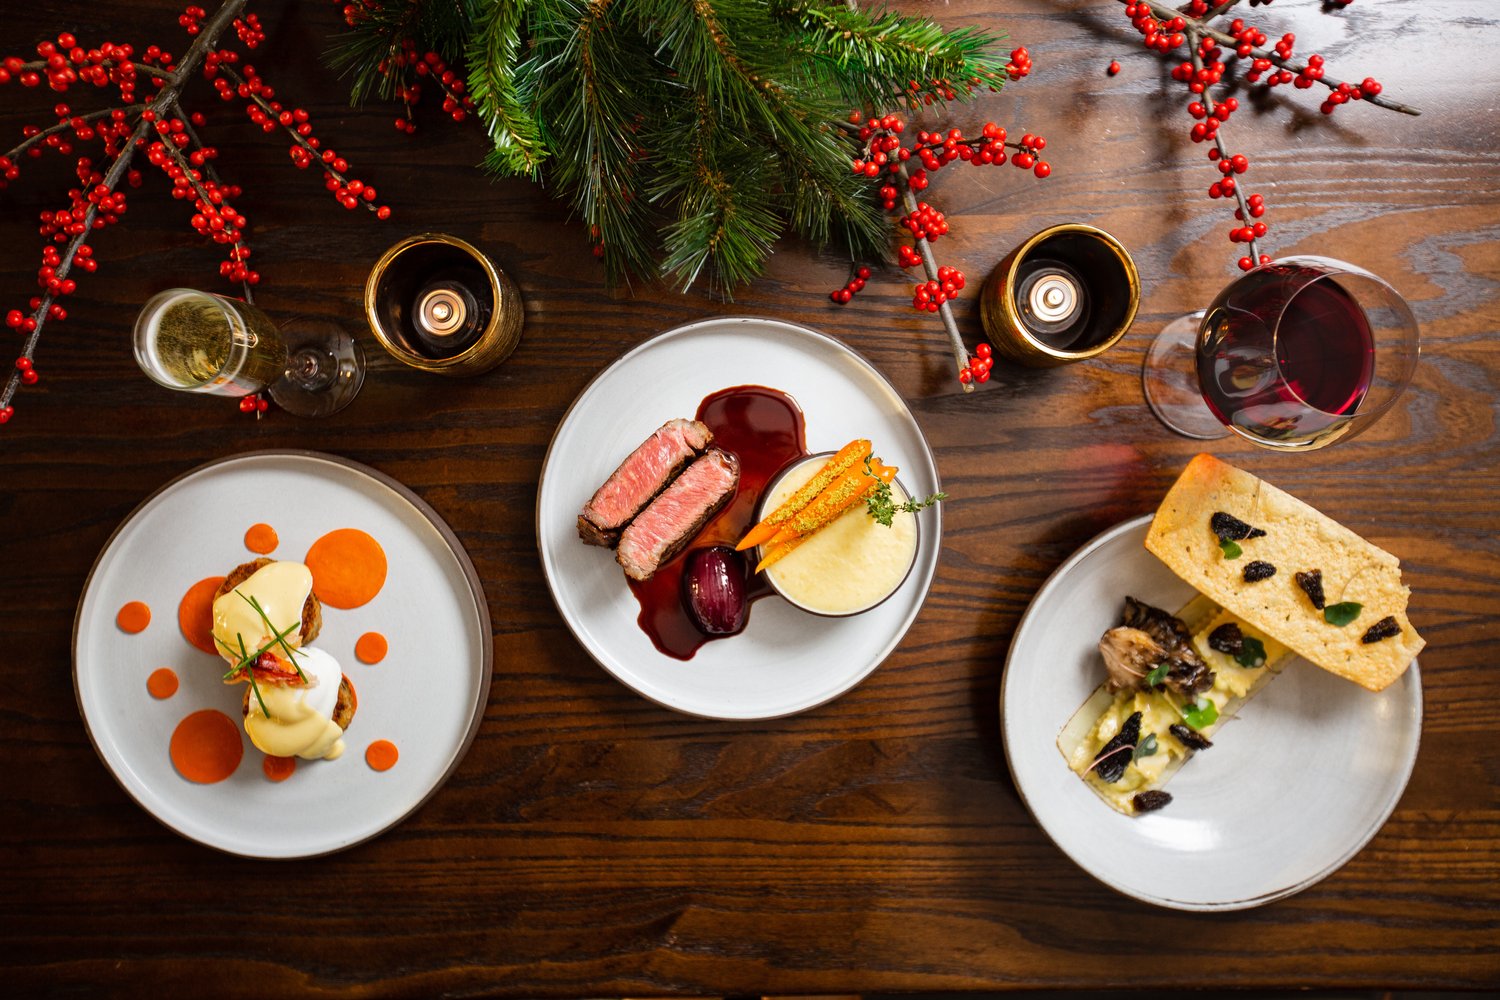 Where to dine in or order takeout for Christmas Day dinner